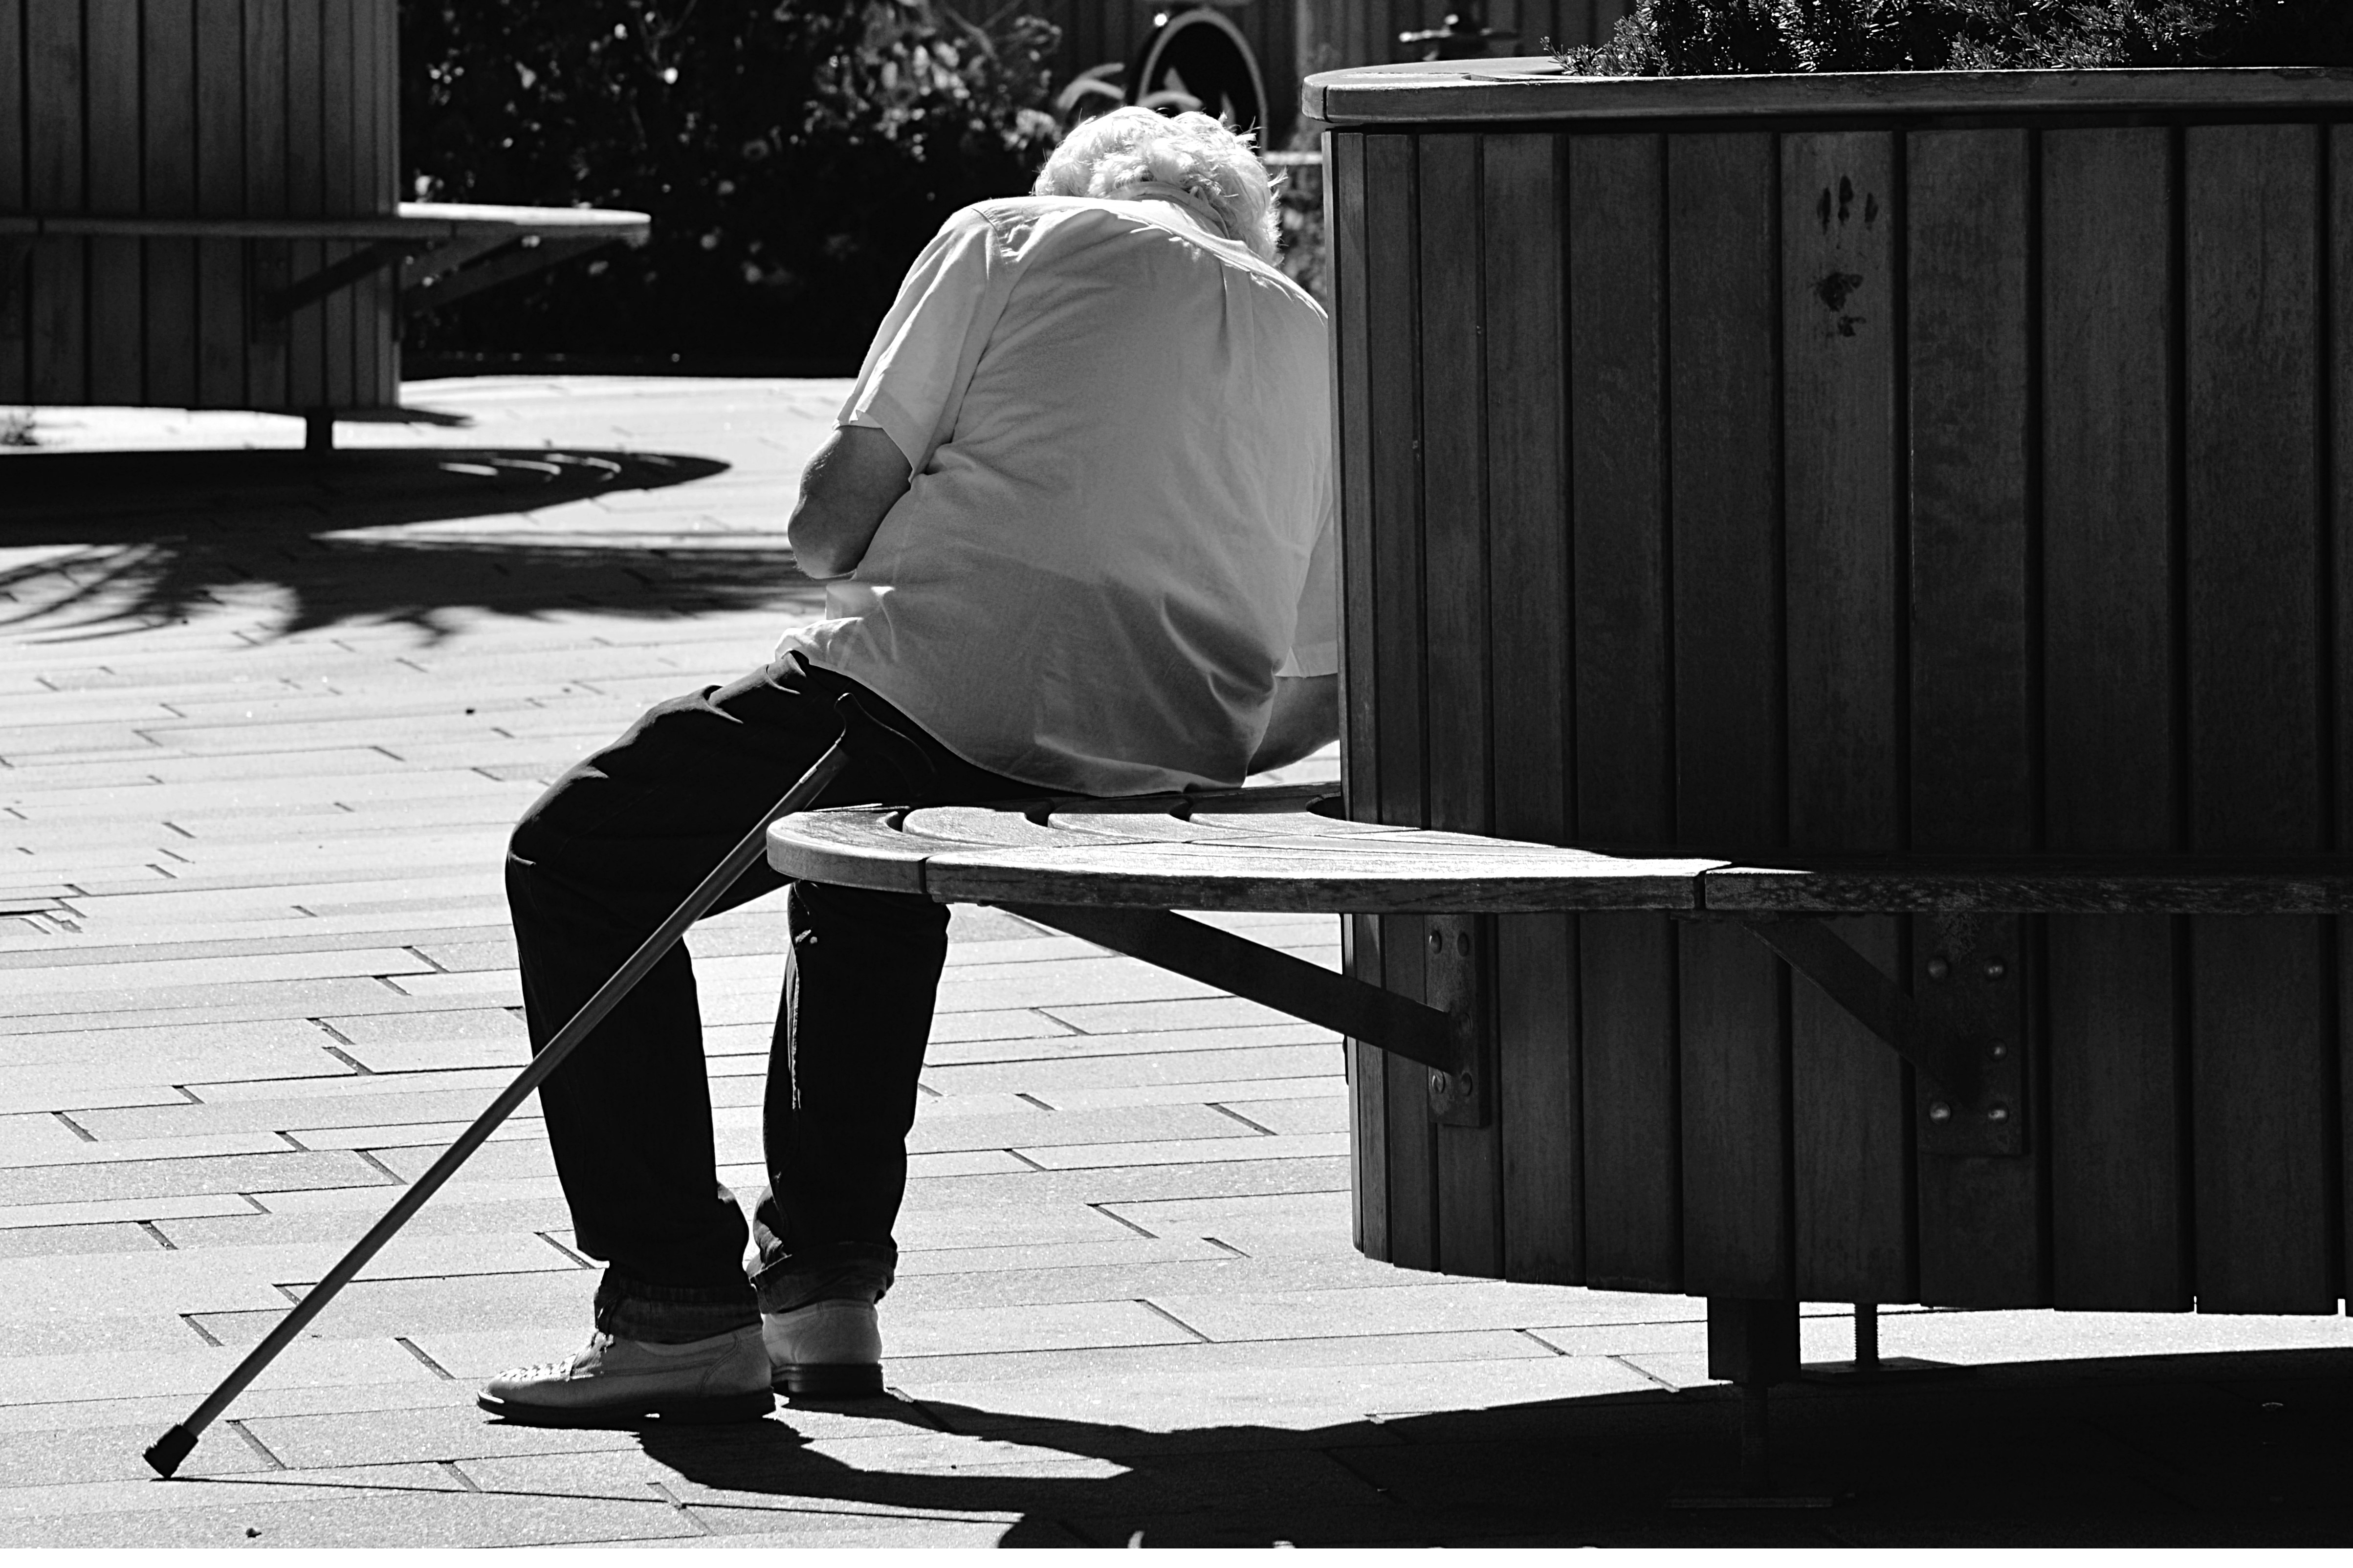 greyscale image of man with walking cane by his side sitting on bench under the sun